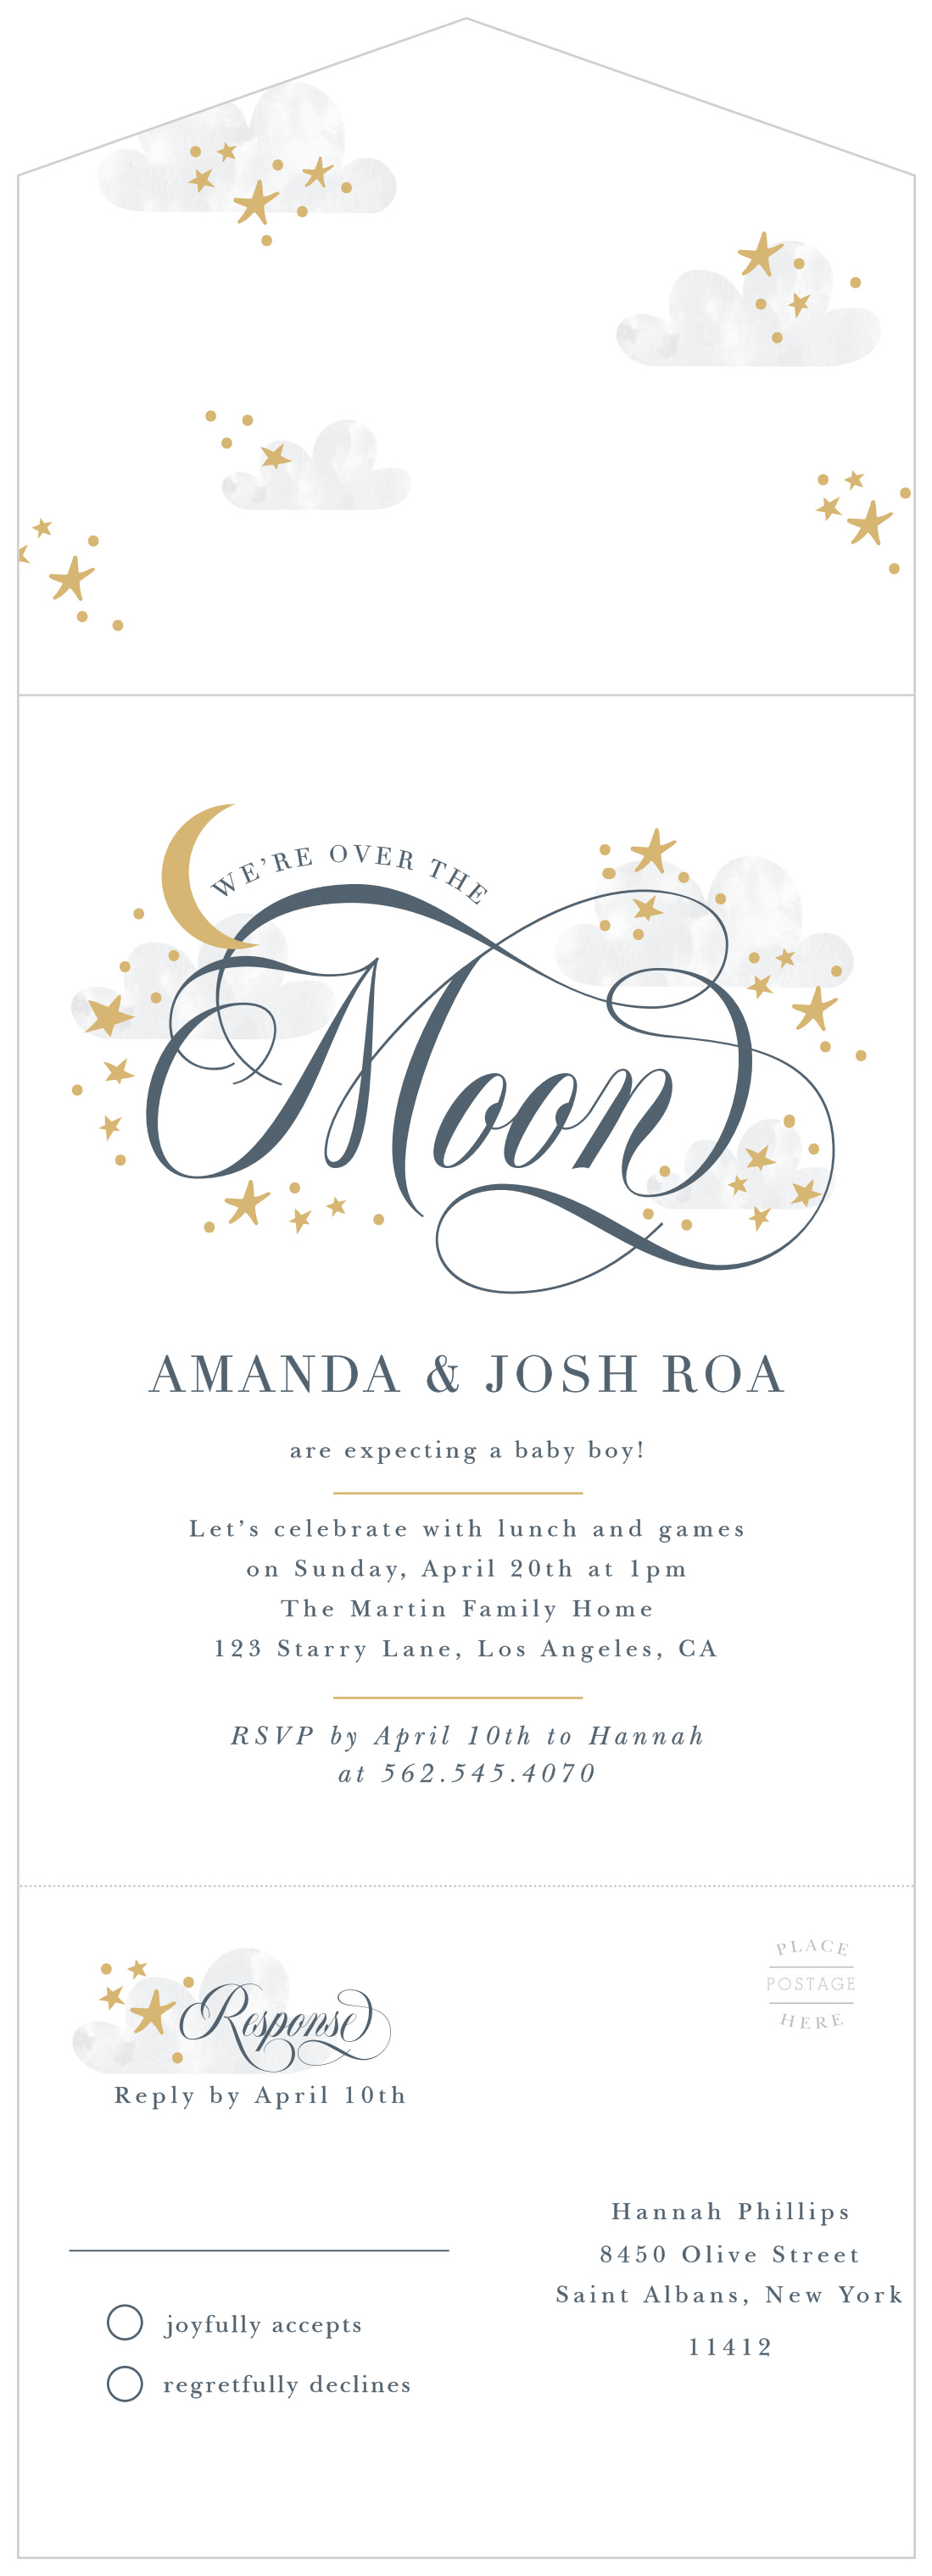 Over the Moon Seal & Send Baby Shower Invitations